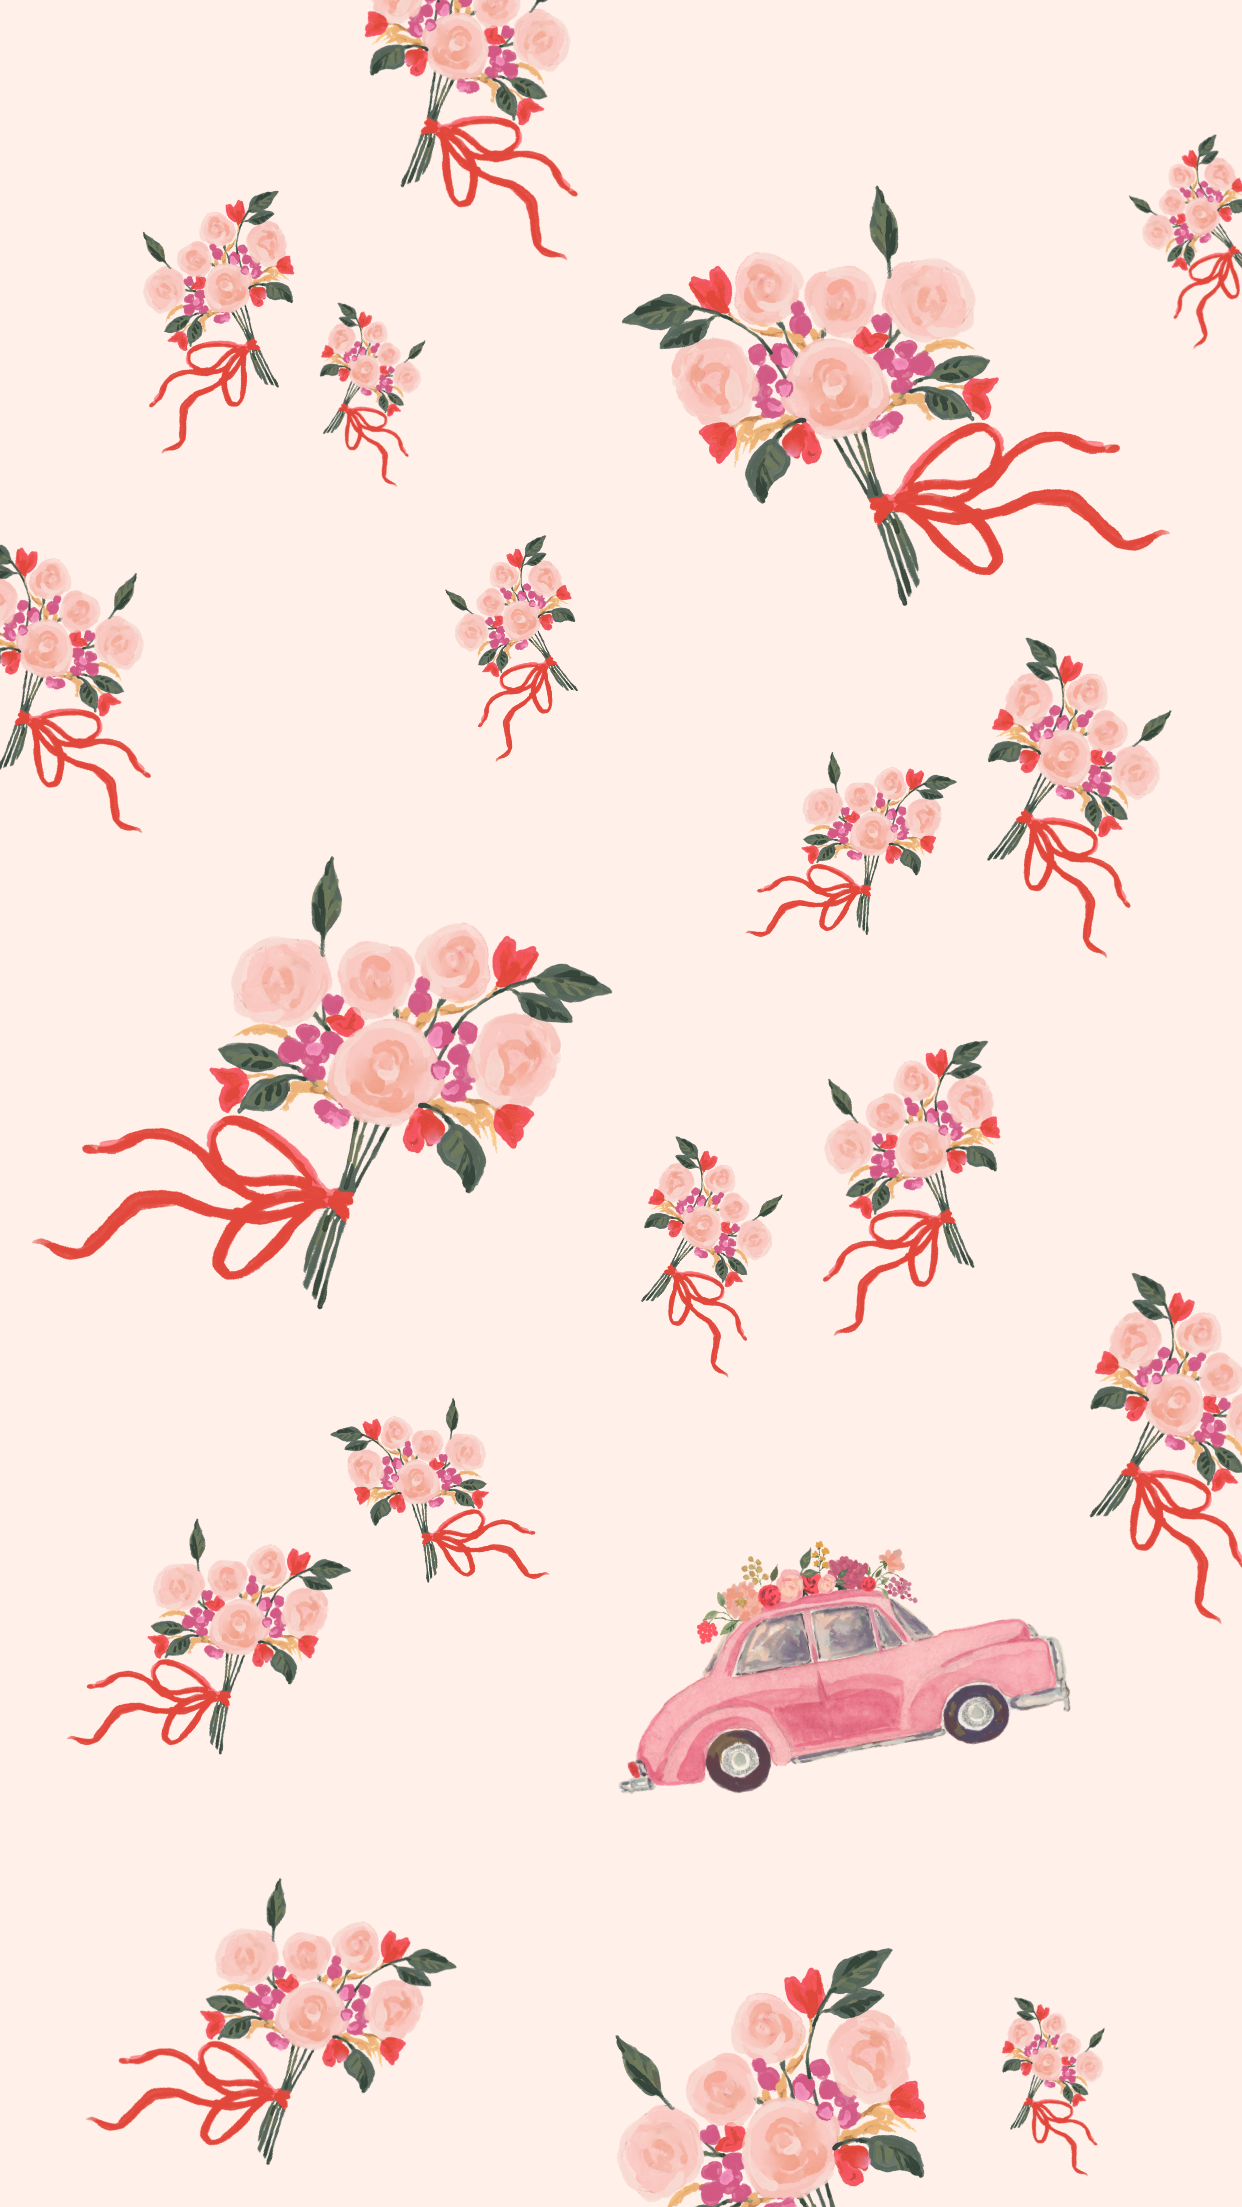 St Valentines Day Flowers and Cars iPhone Wallpaper